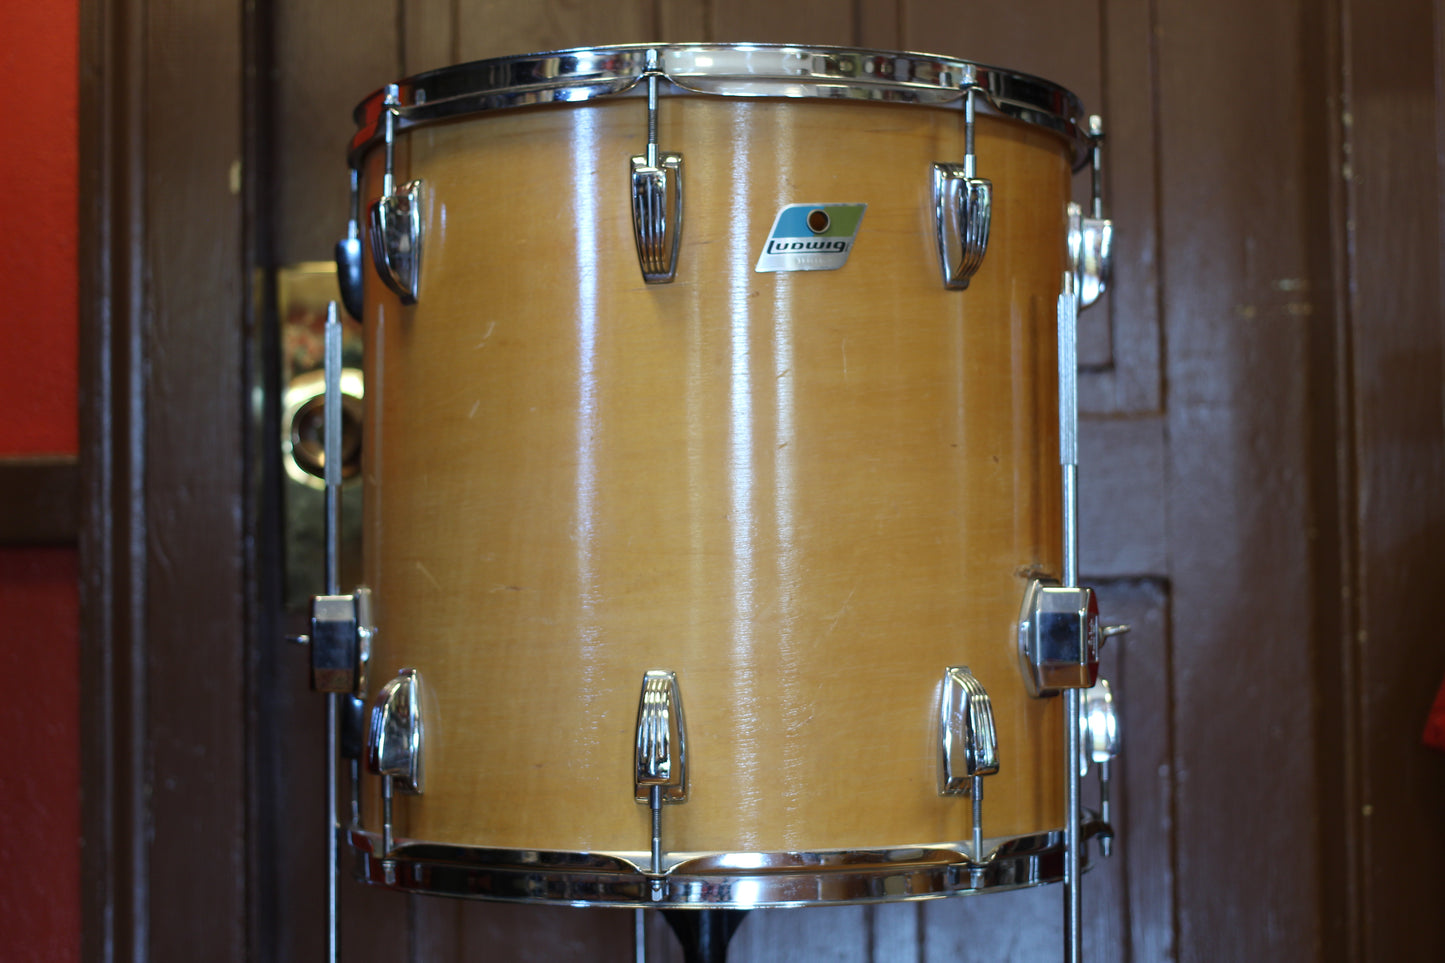 1970 Ludwig Hollywood outfit in Thermogloss 14x22 16x16 9x13 8x12